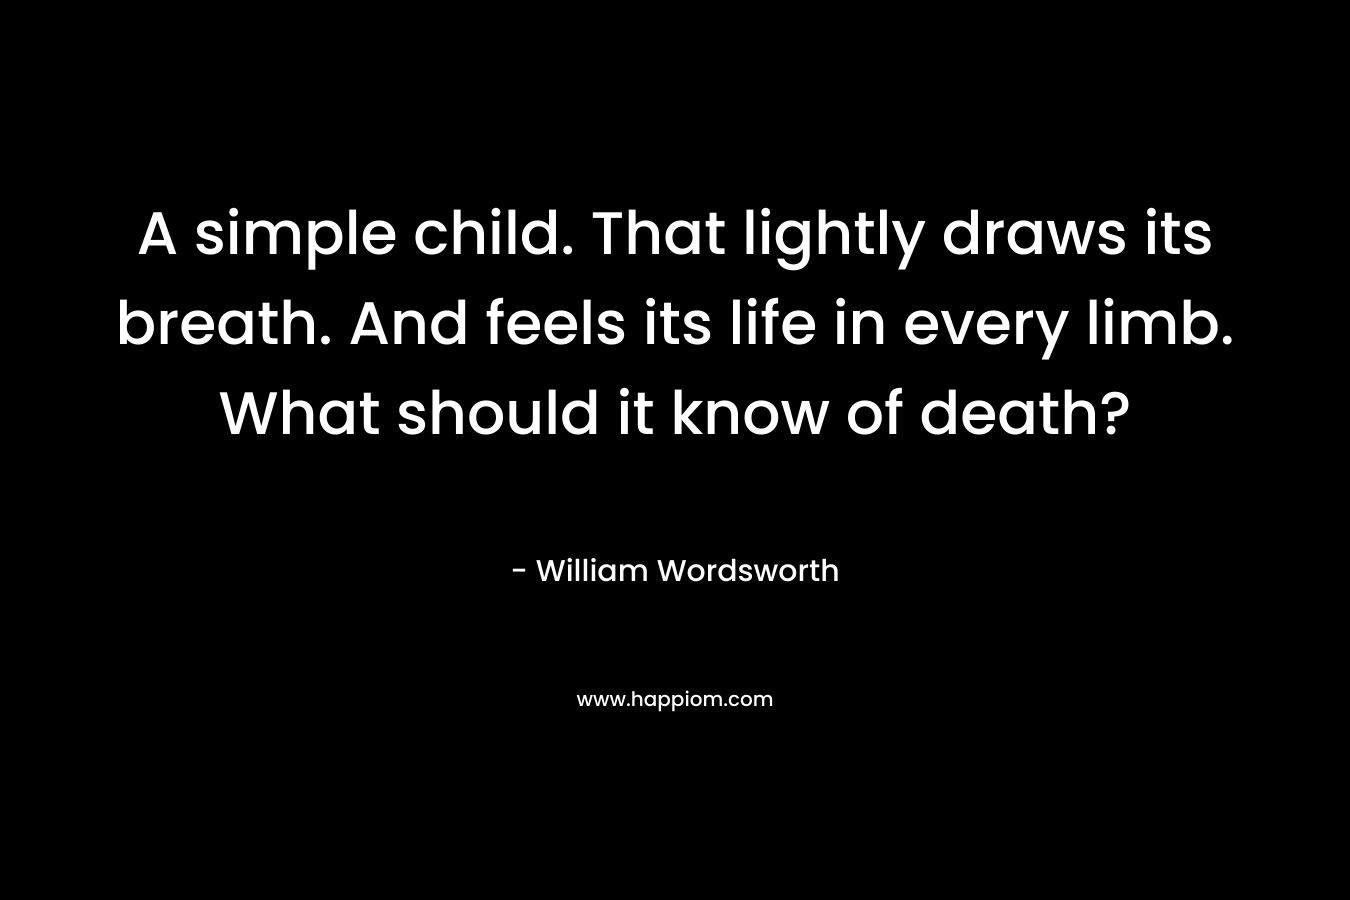 A simple child. That lightly draws its breath. And feels its life in every limb. What should it know of death? – William Wordsworth